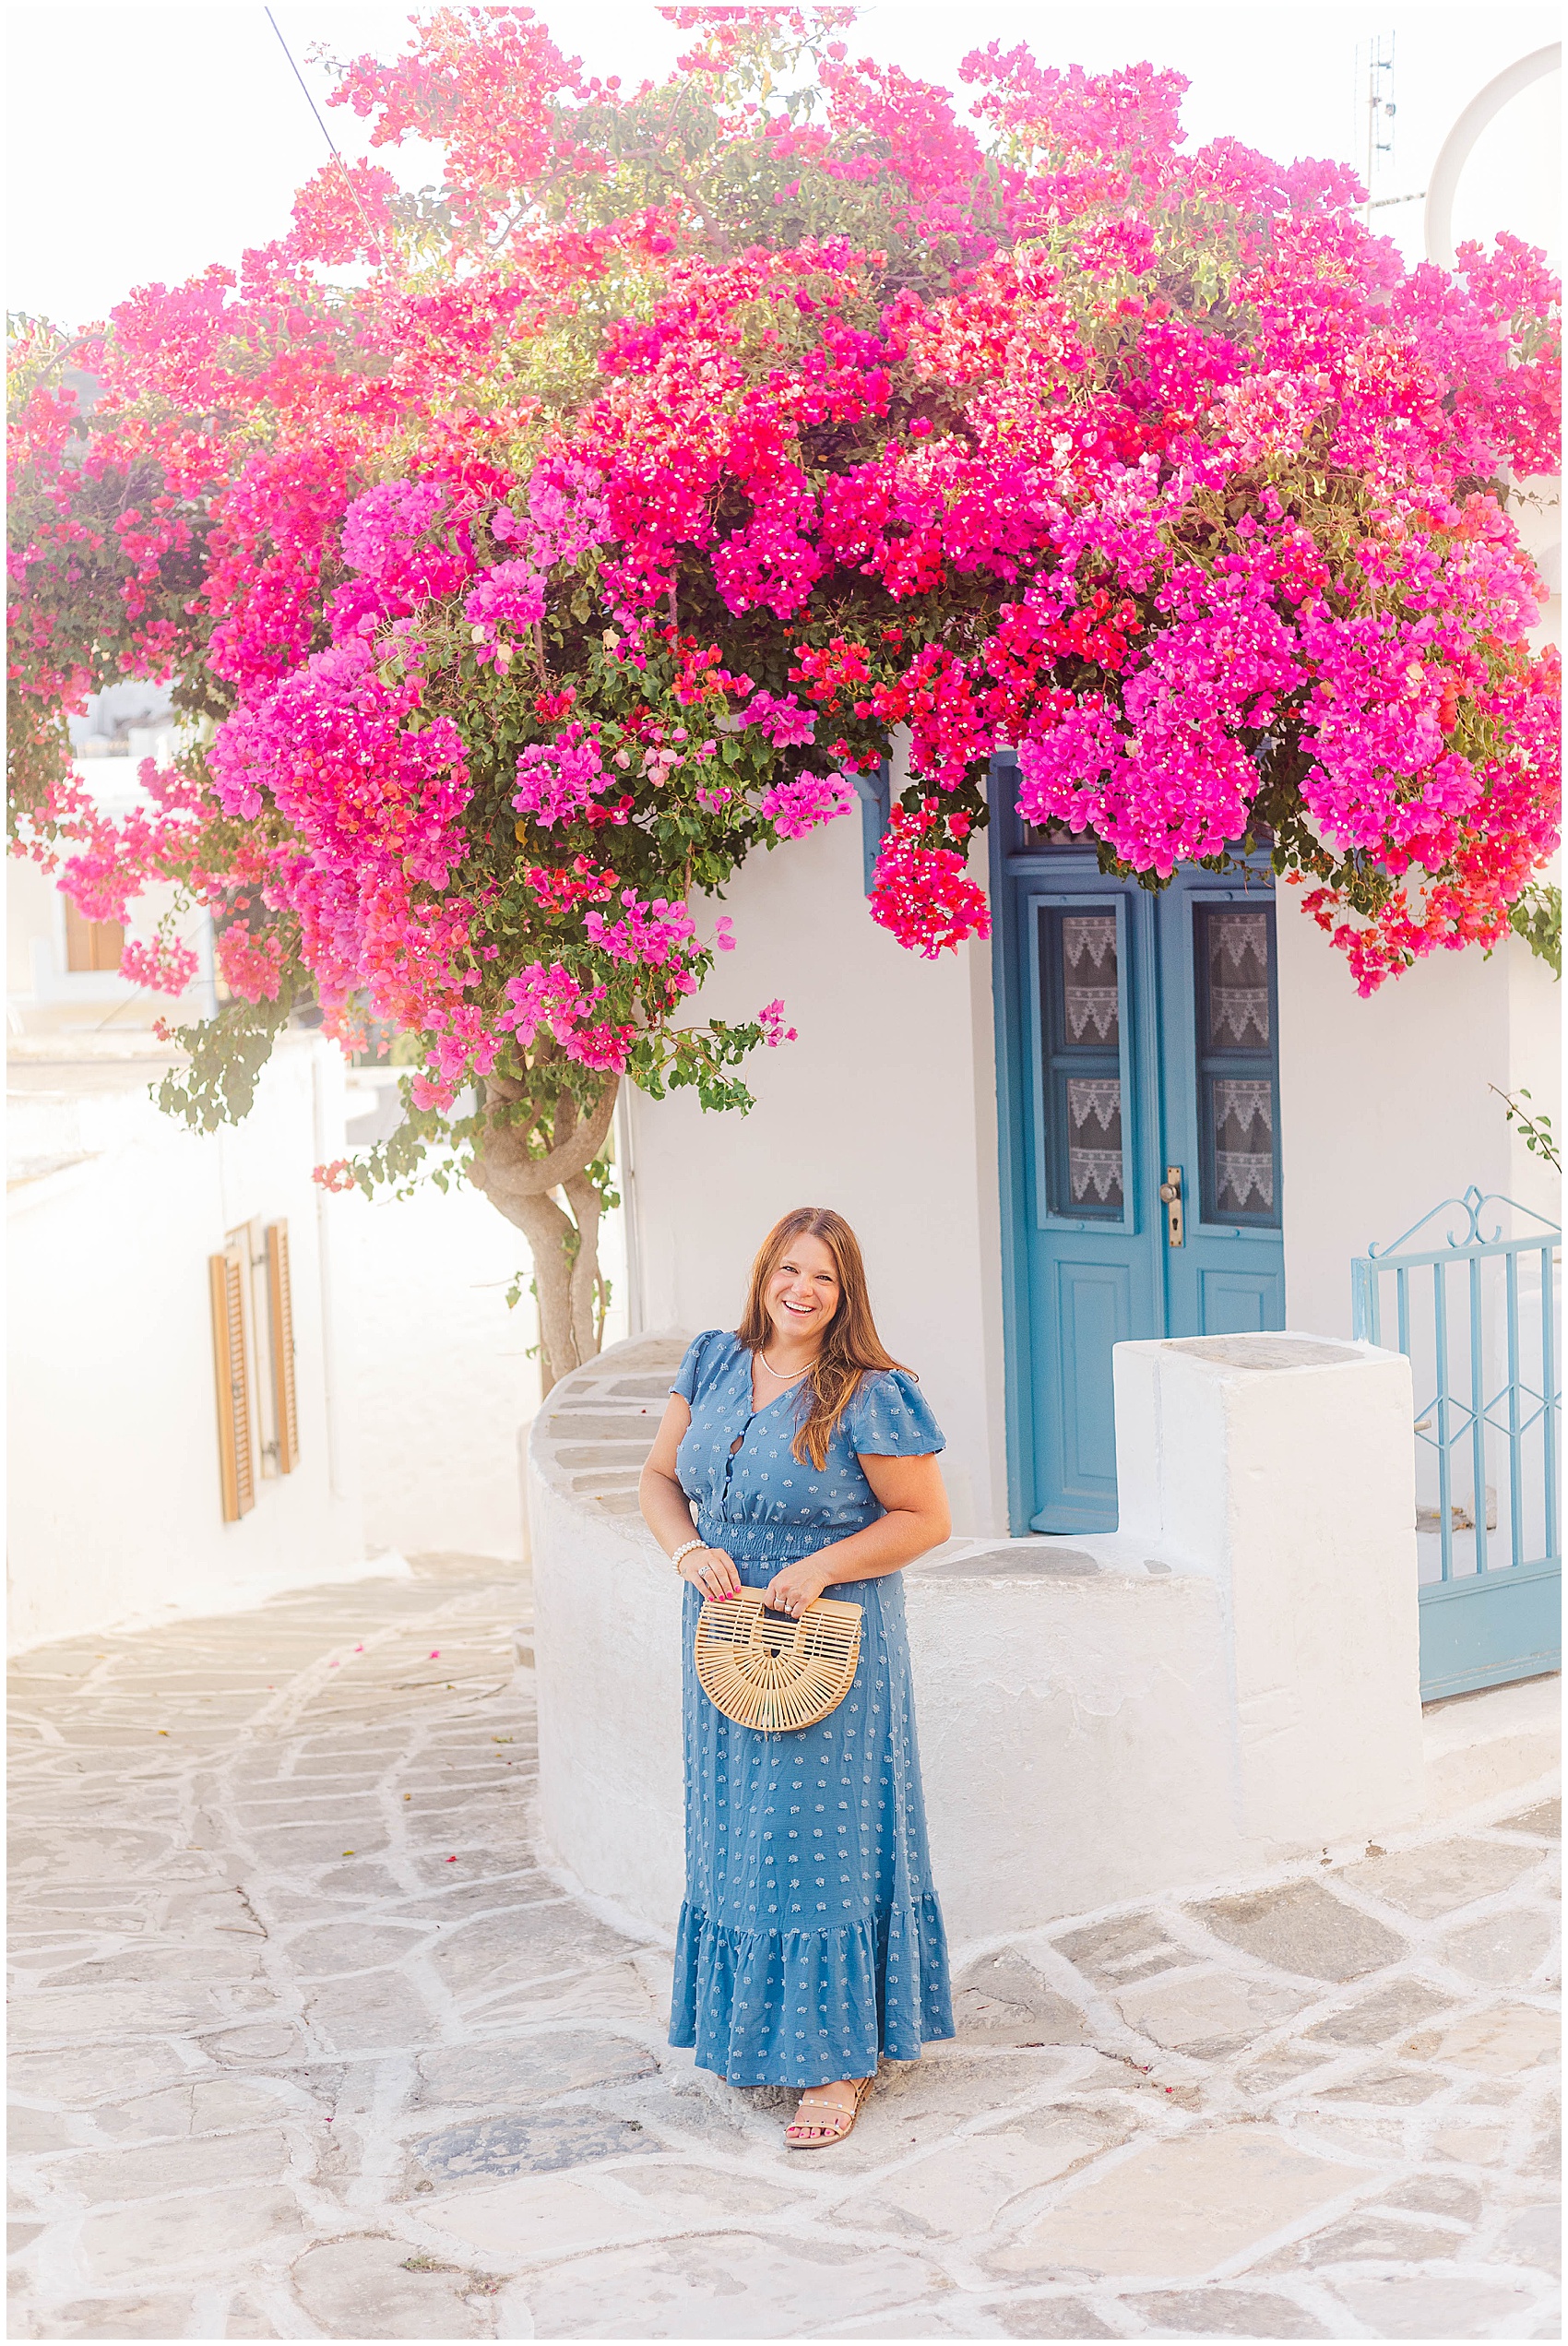 woman in blue dress standing under pink flowers greece photoshoot